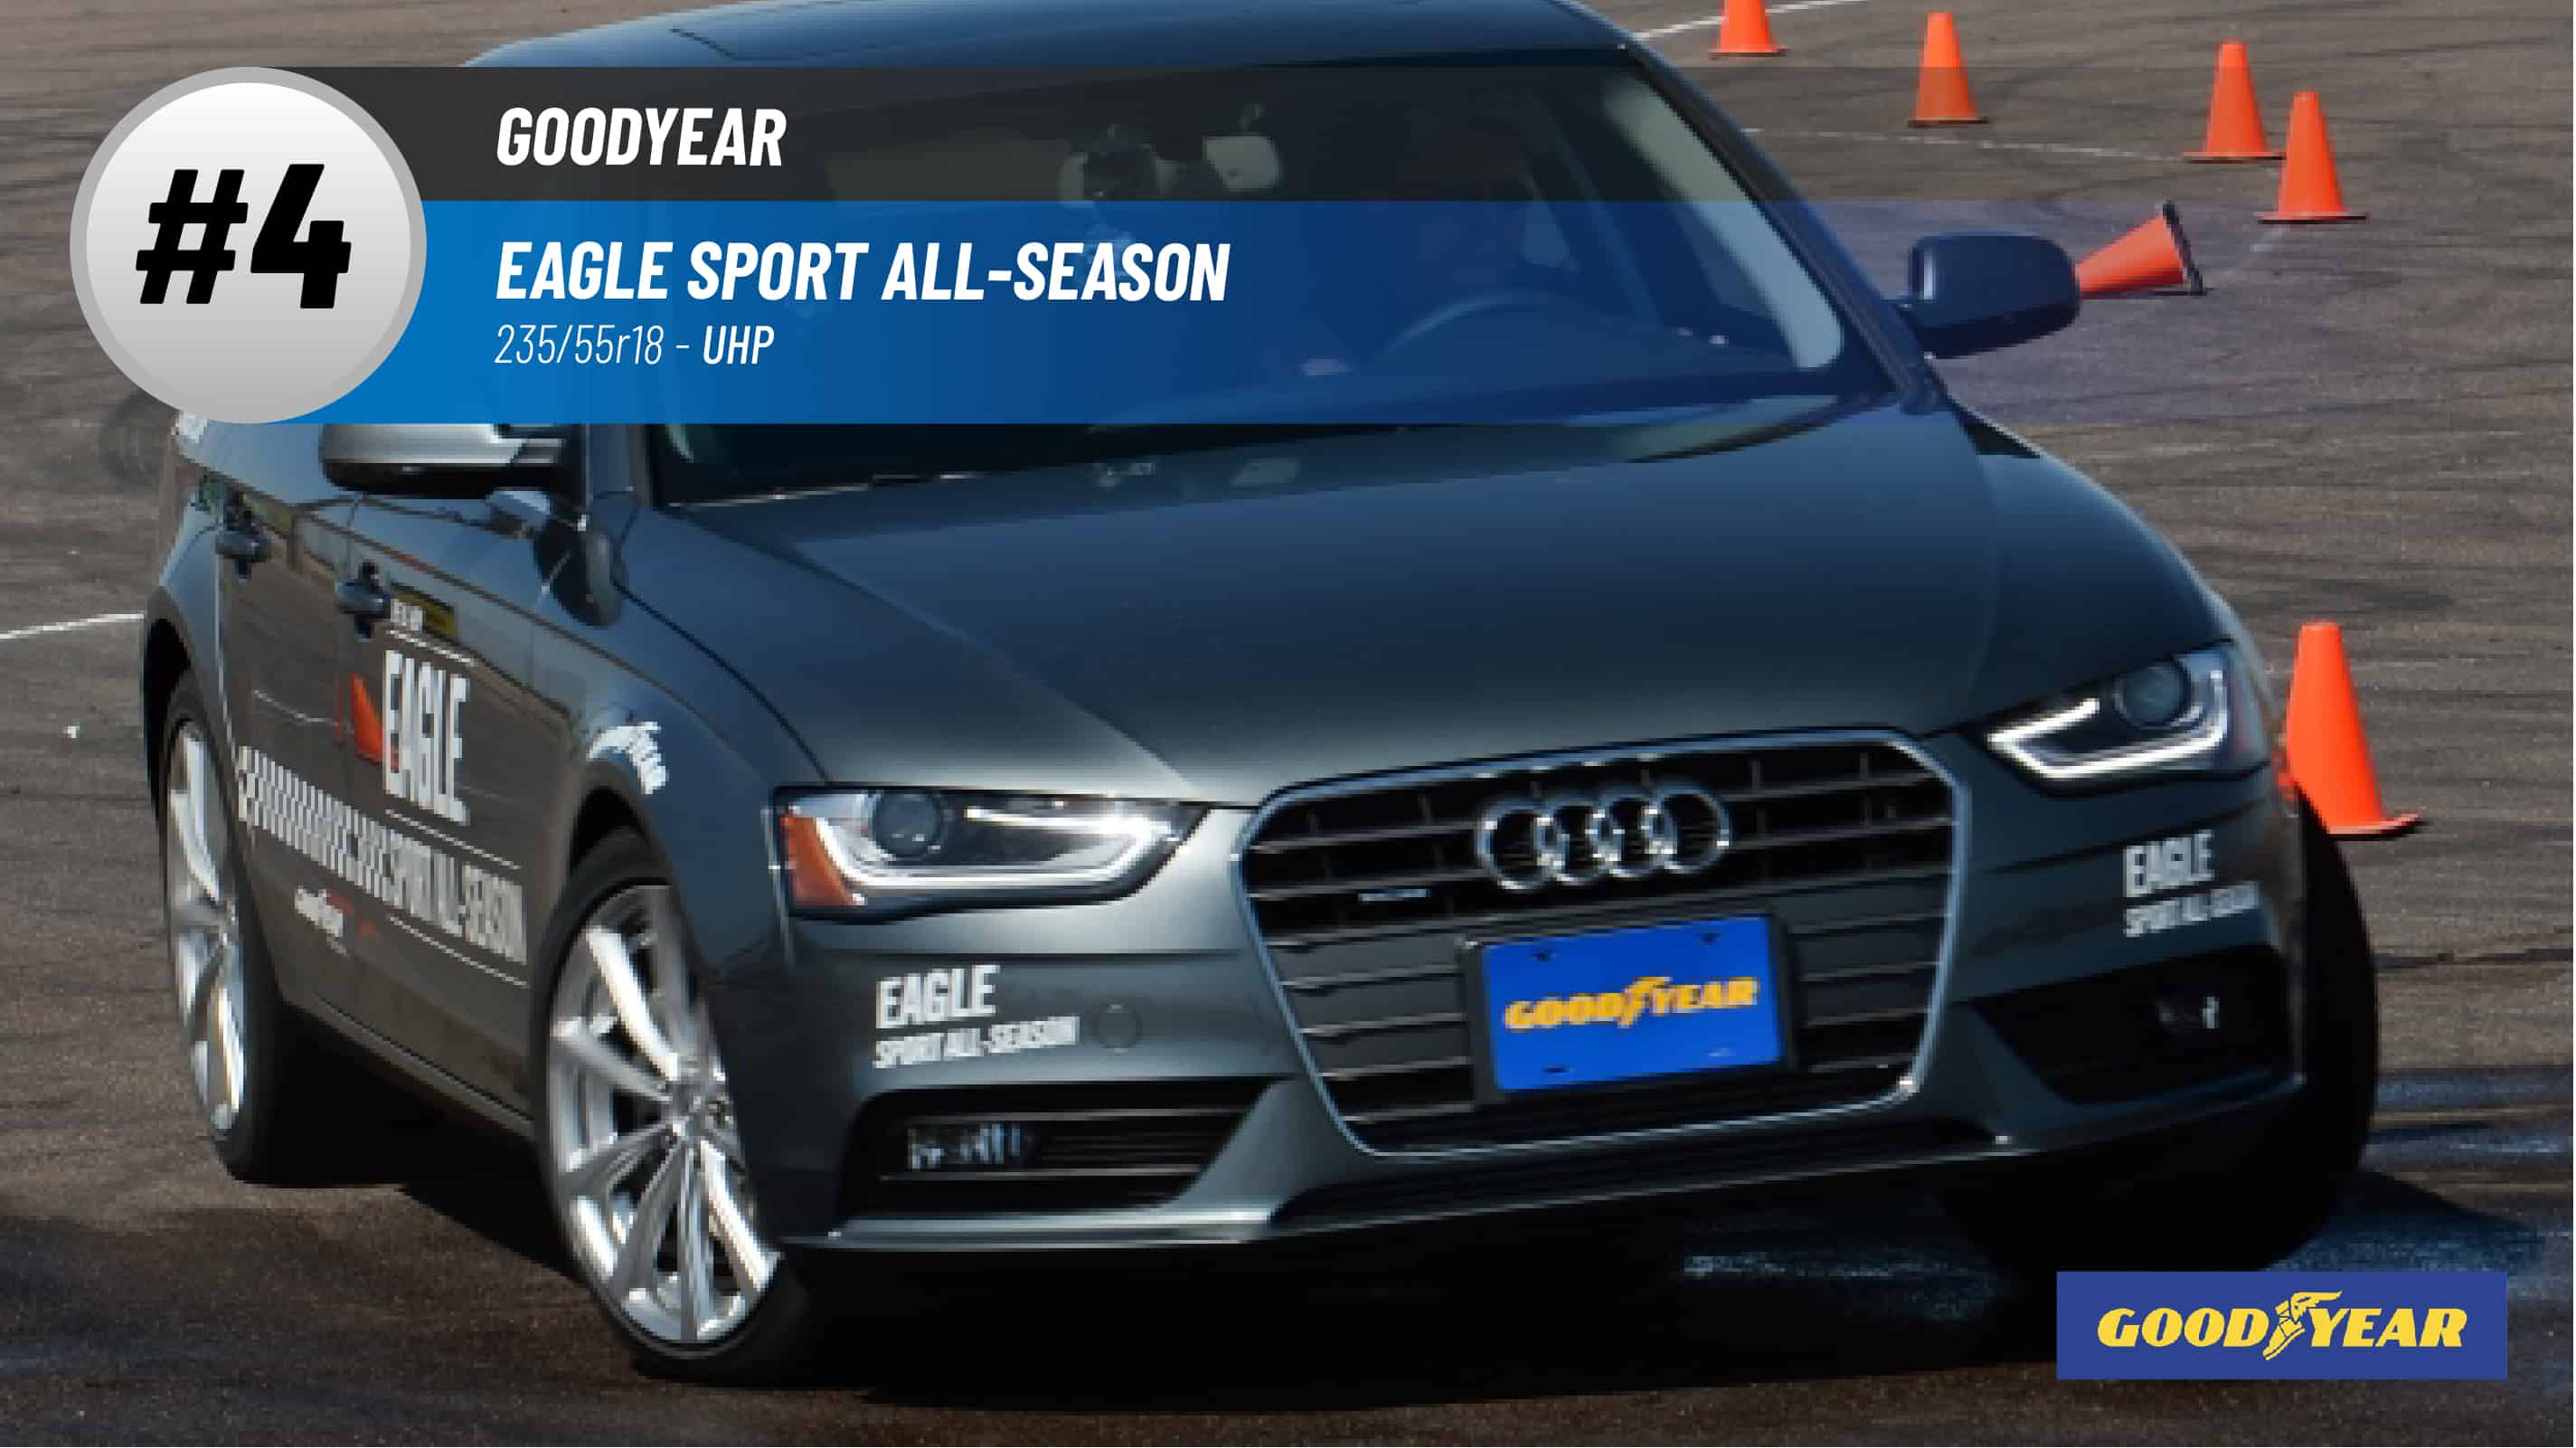 Top #4 UHP Tires: Goodyear Eagle Sport All-Season –best 235/55r18